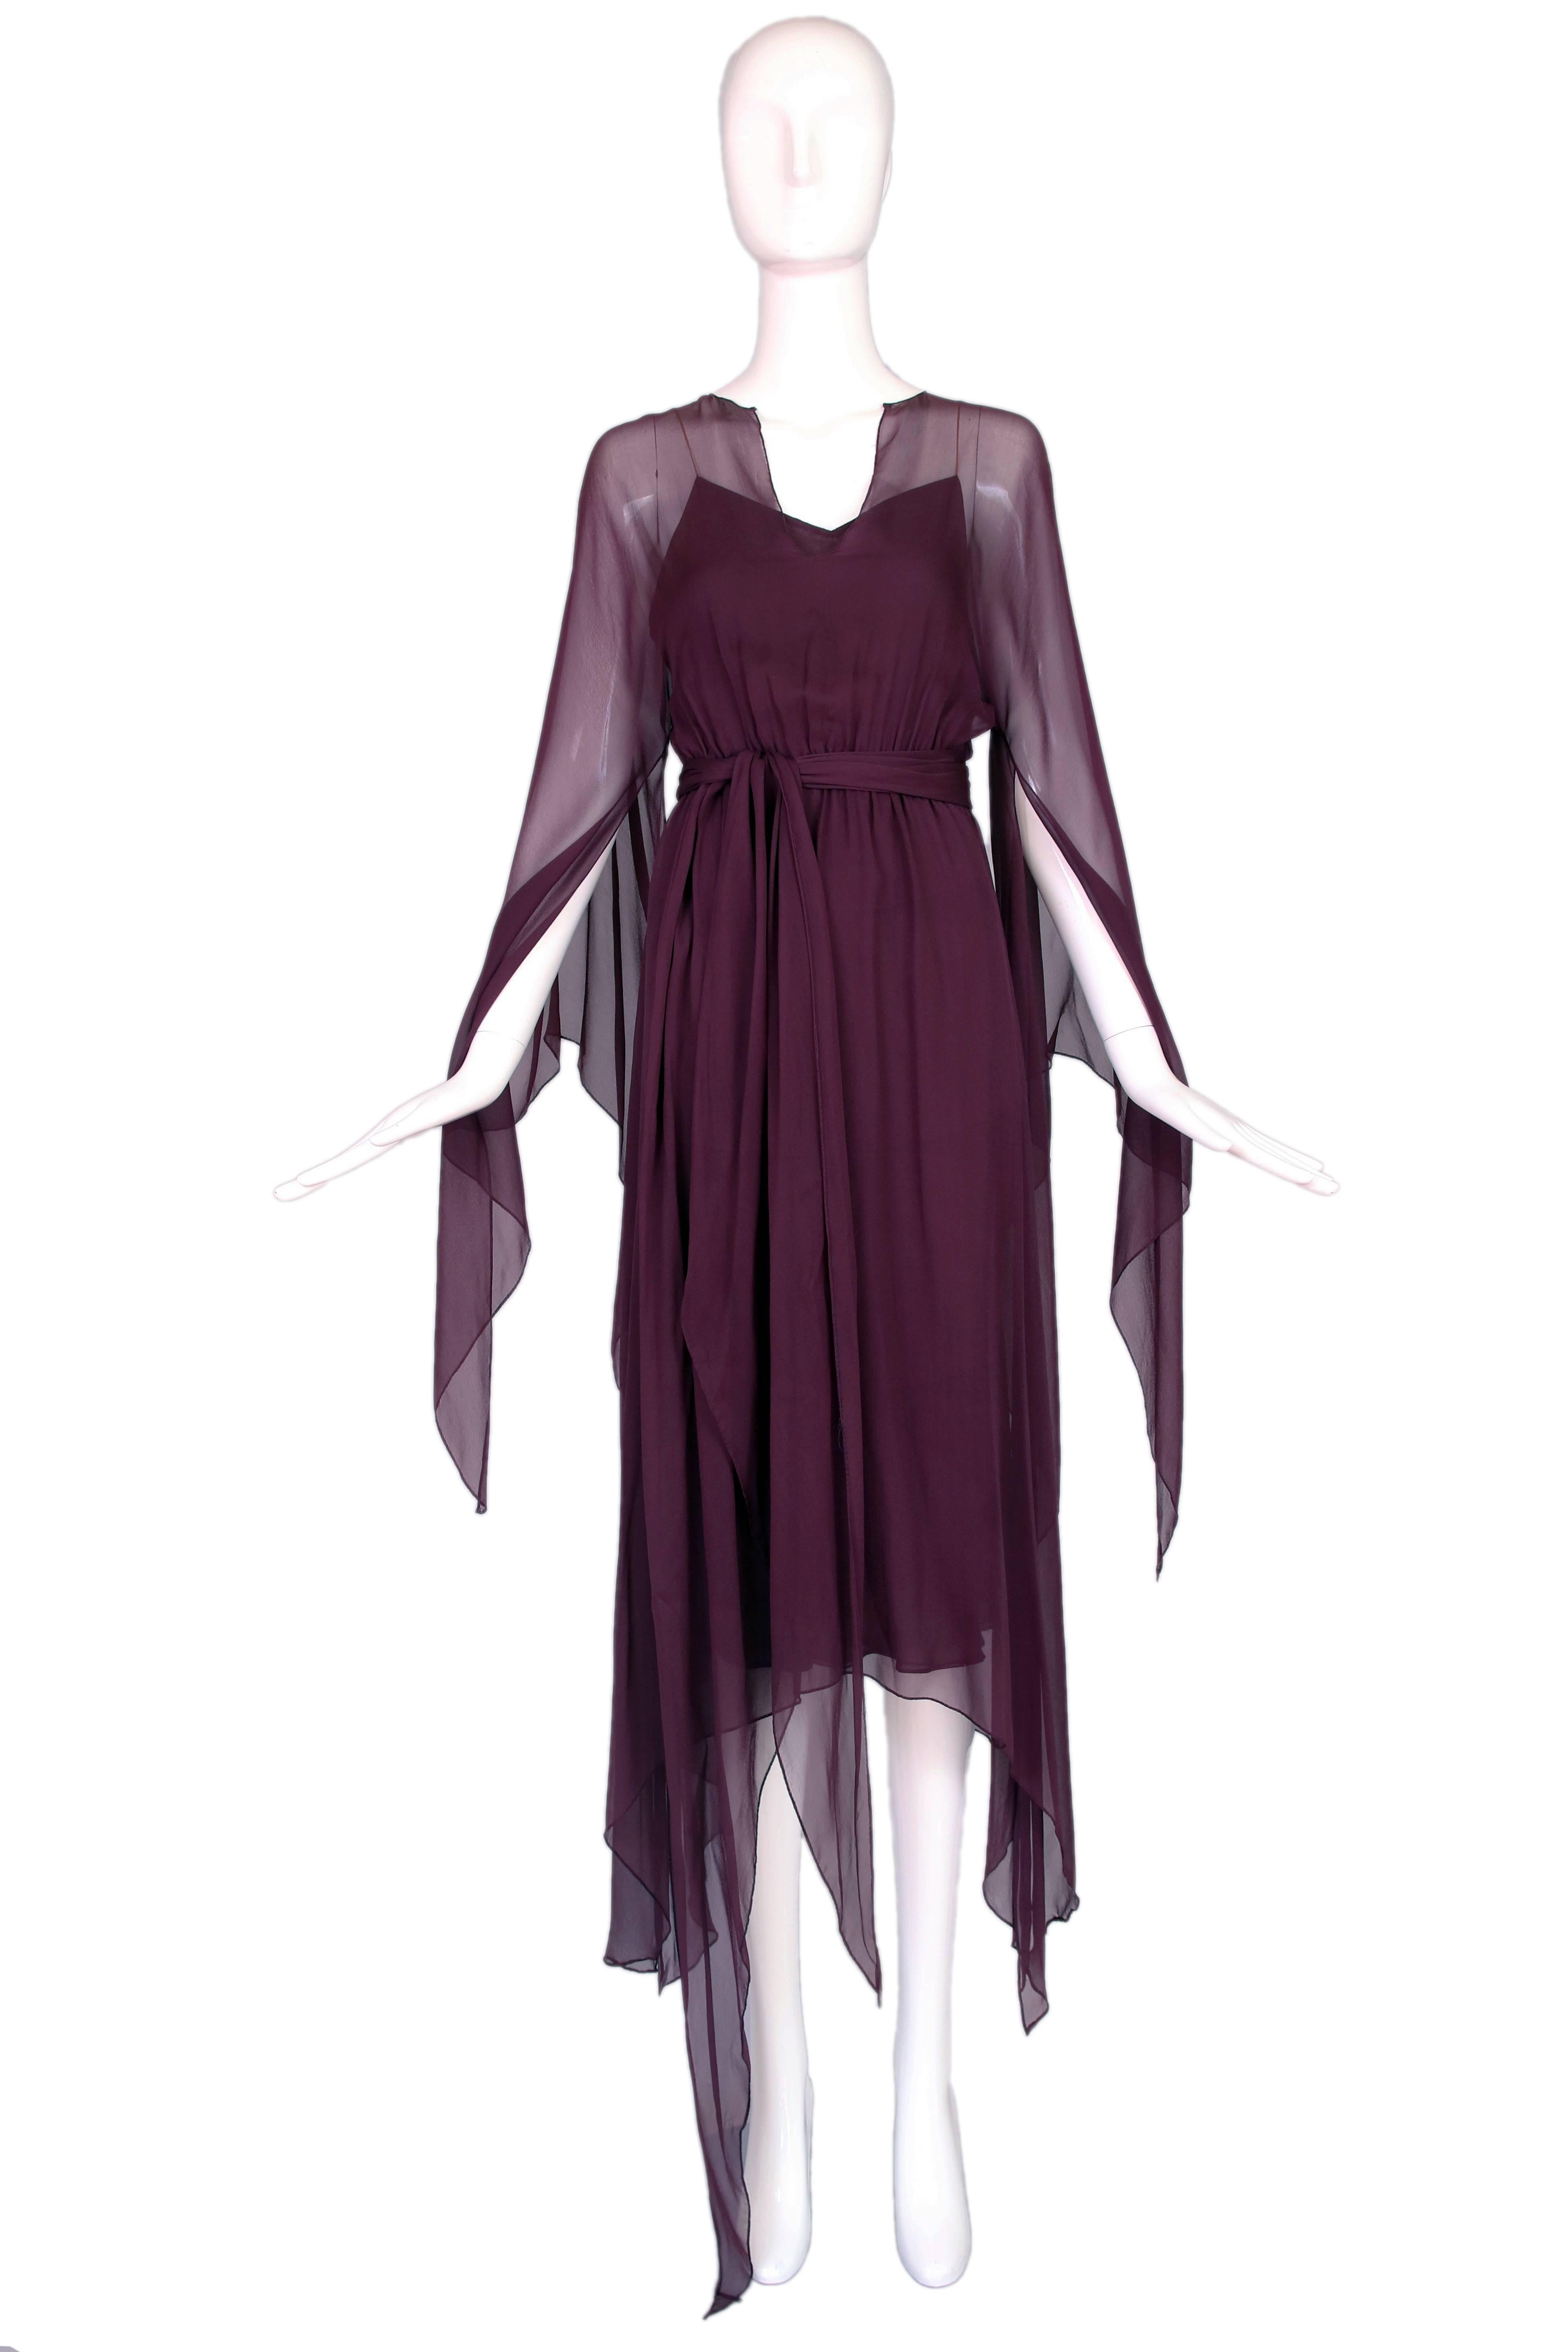 1970's Halston eggplant/purple double layer chiffon dress with sash tie and mult-layered matching slip. In excellent condition.
MEASUREMENTS:
Bust - 32